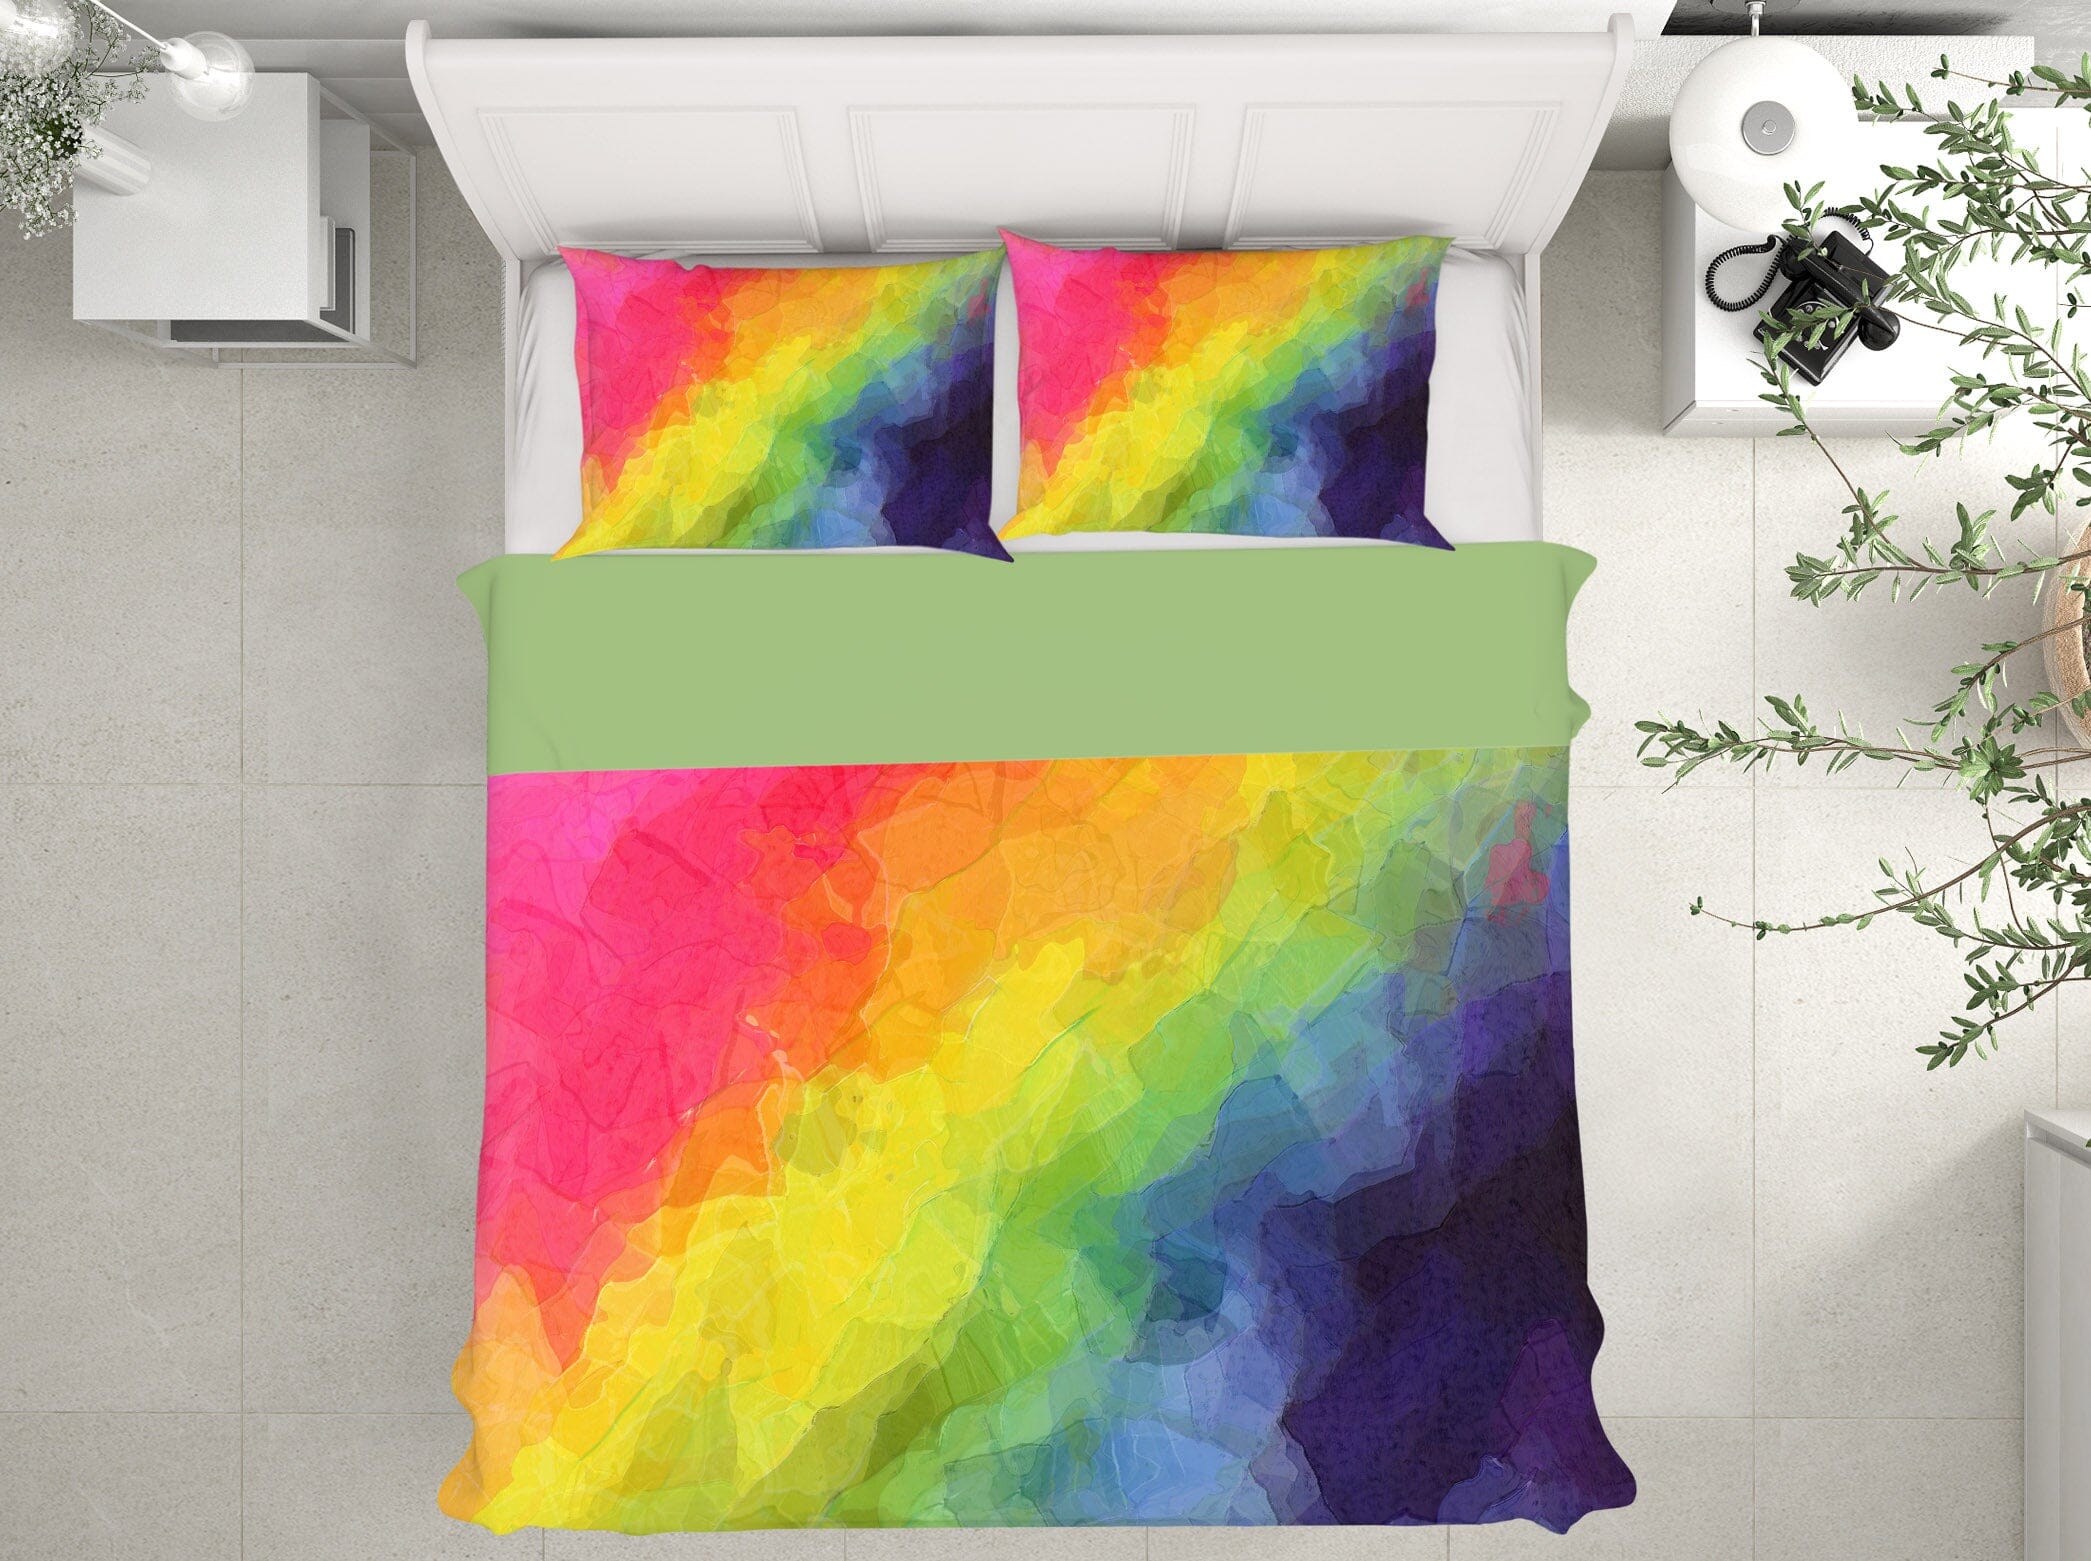 3D Rainbow Color 2003 Shandra Smith Bedding Bed Pillowcases Quilt Quiet Covers AJ Creativity Home 